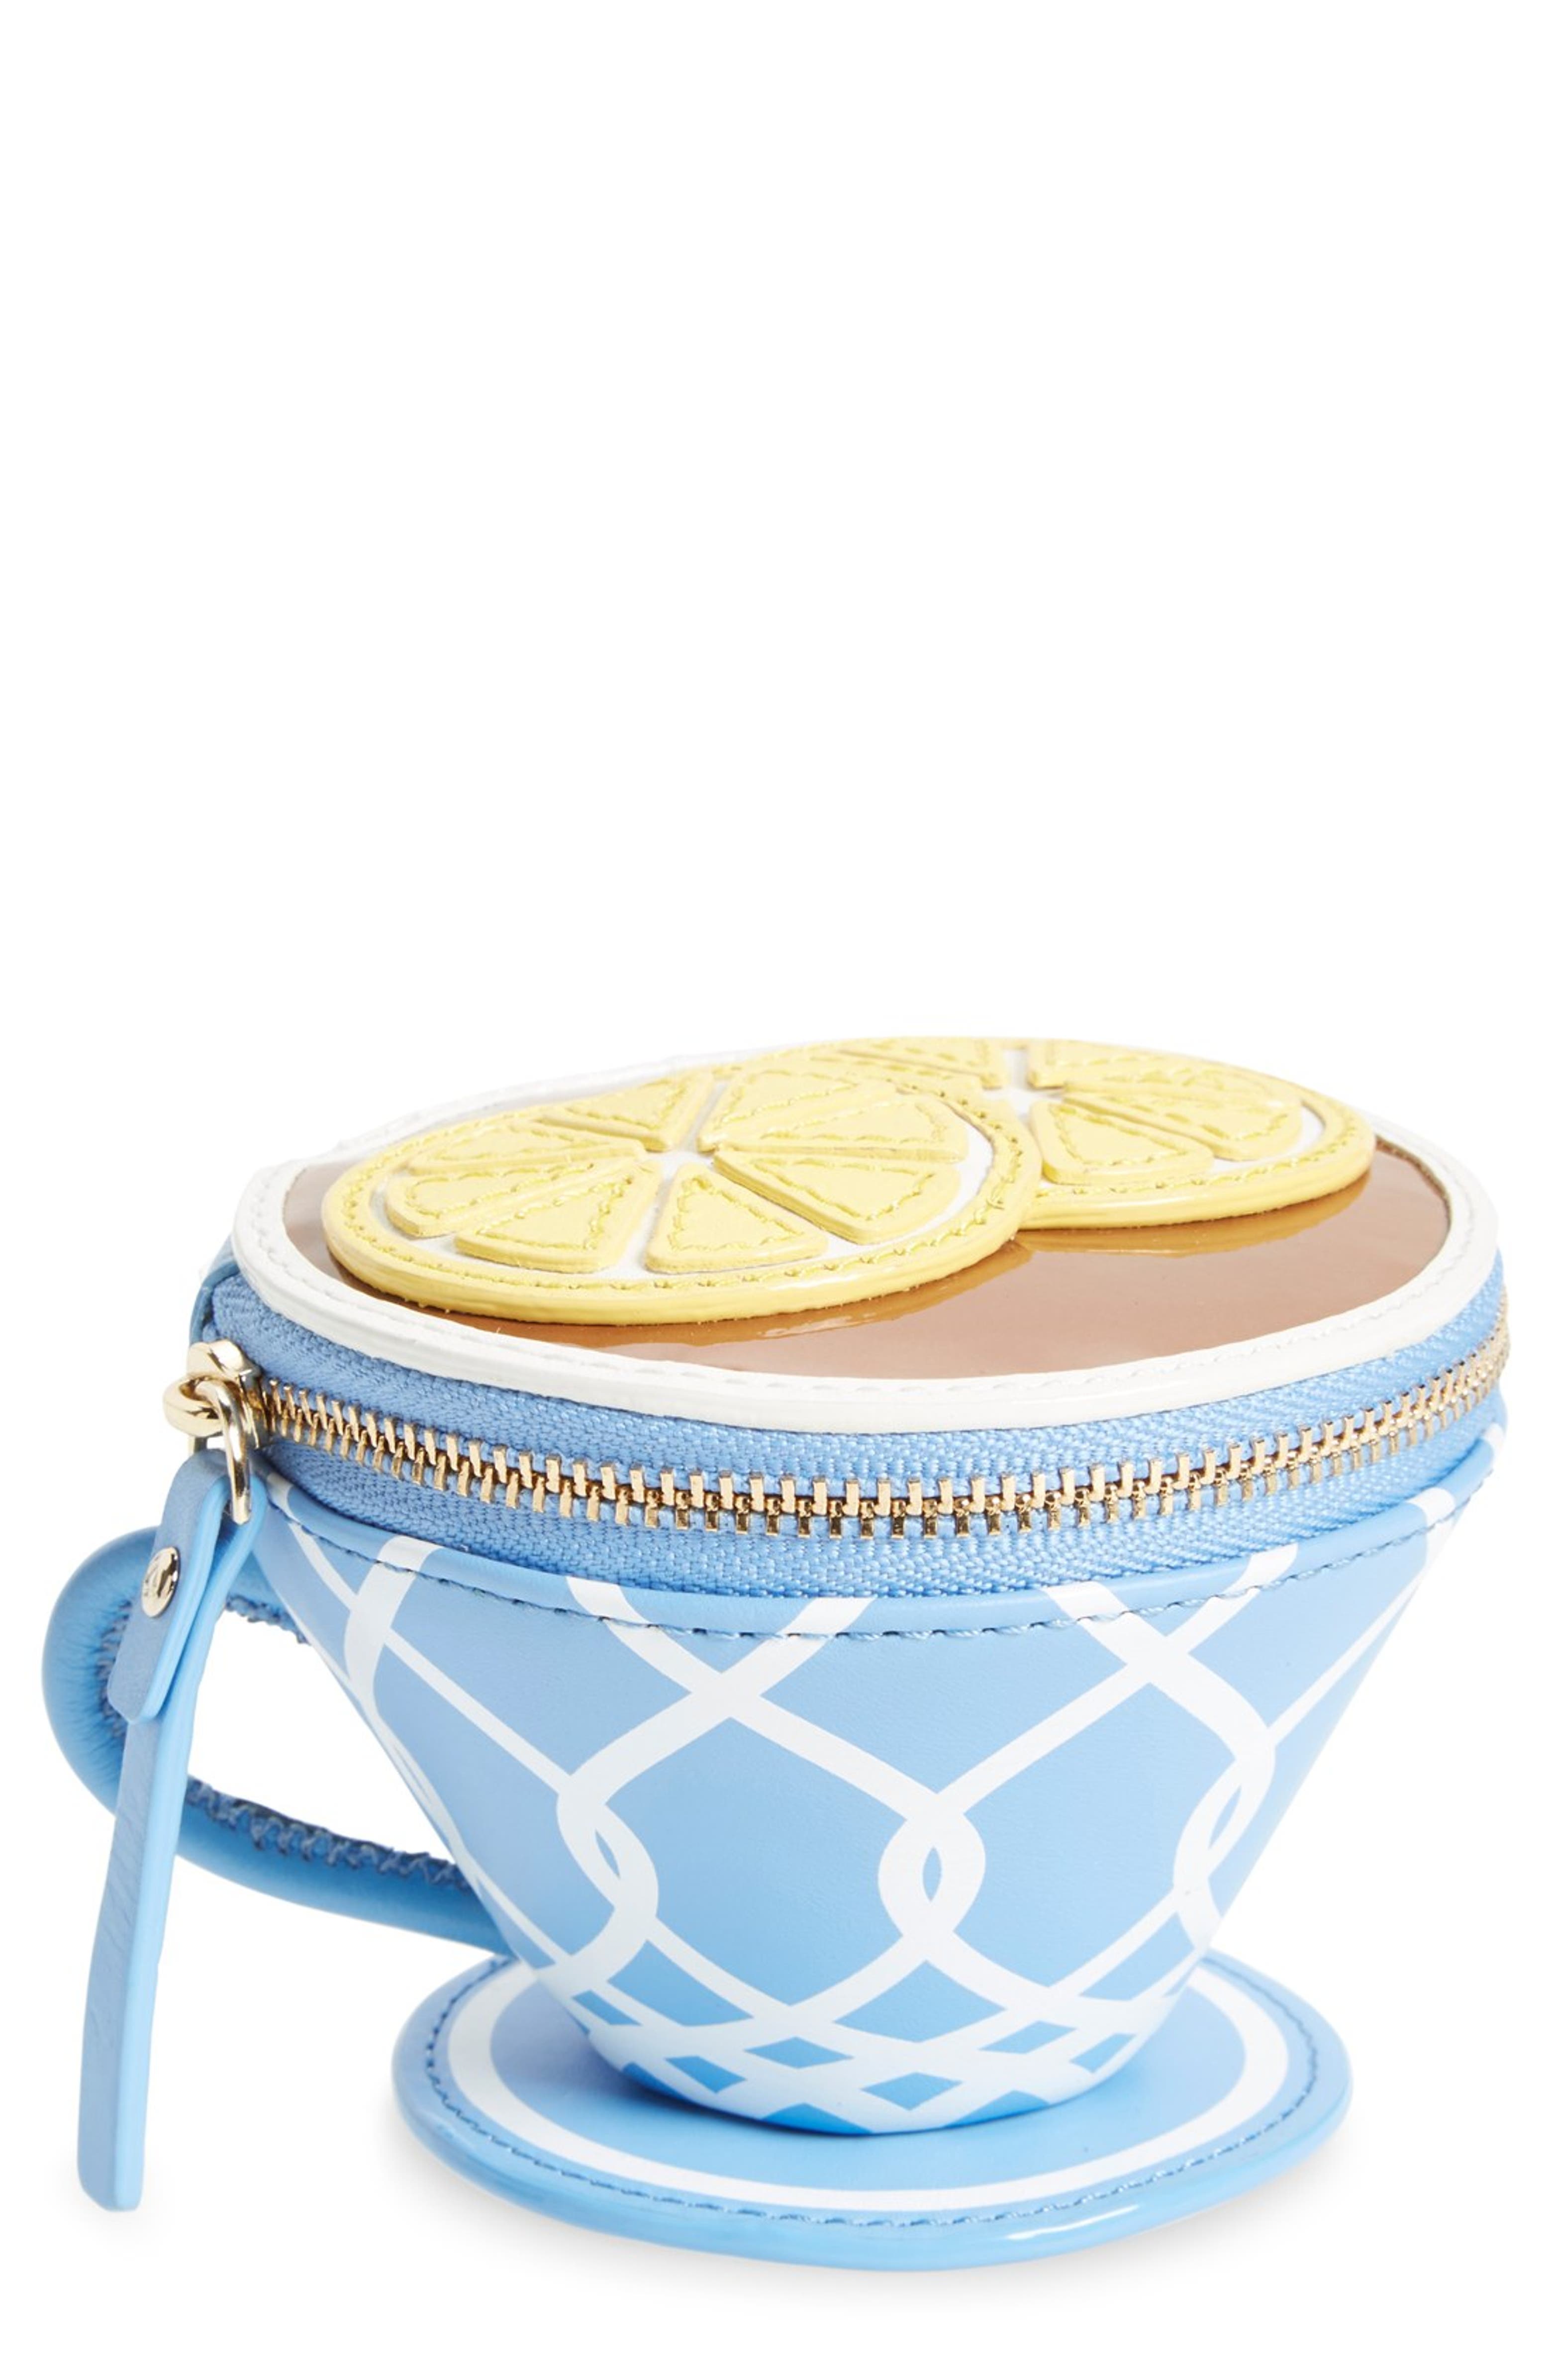 kate spade new york 'tea cup' leather coin purse Nordstrom